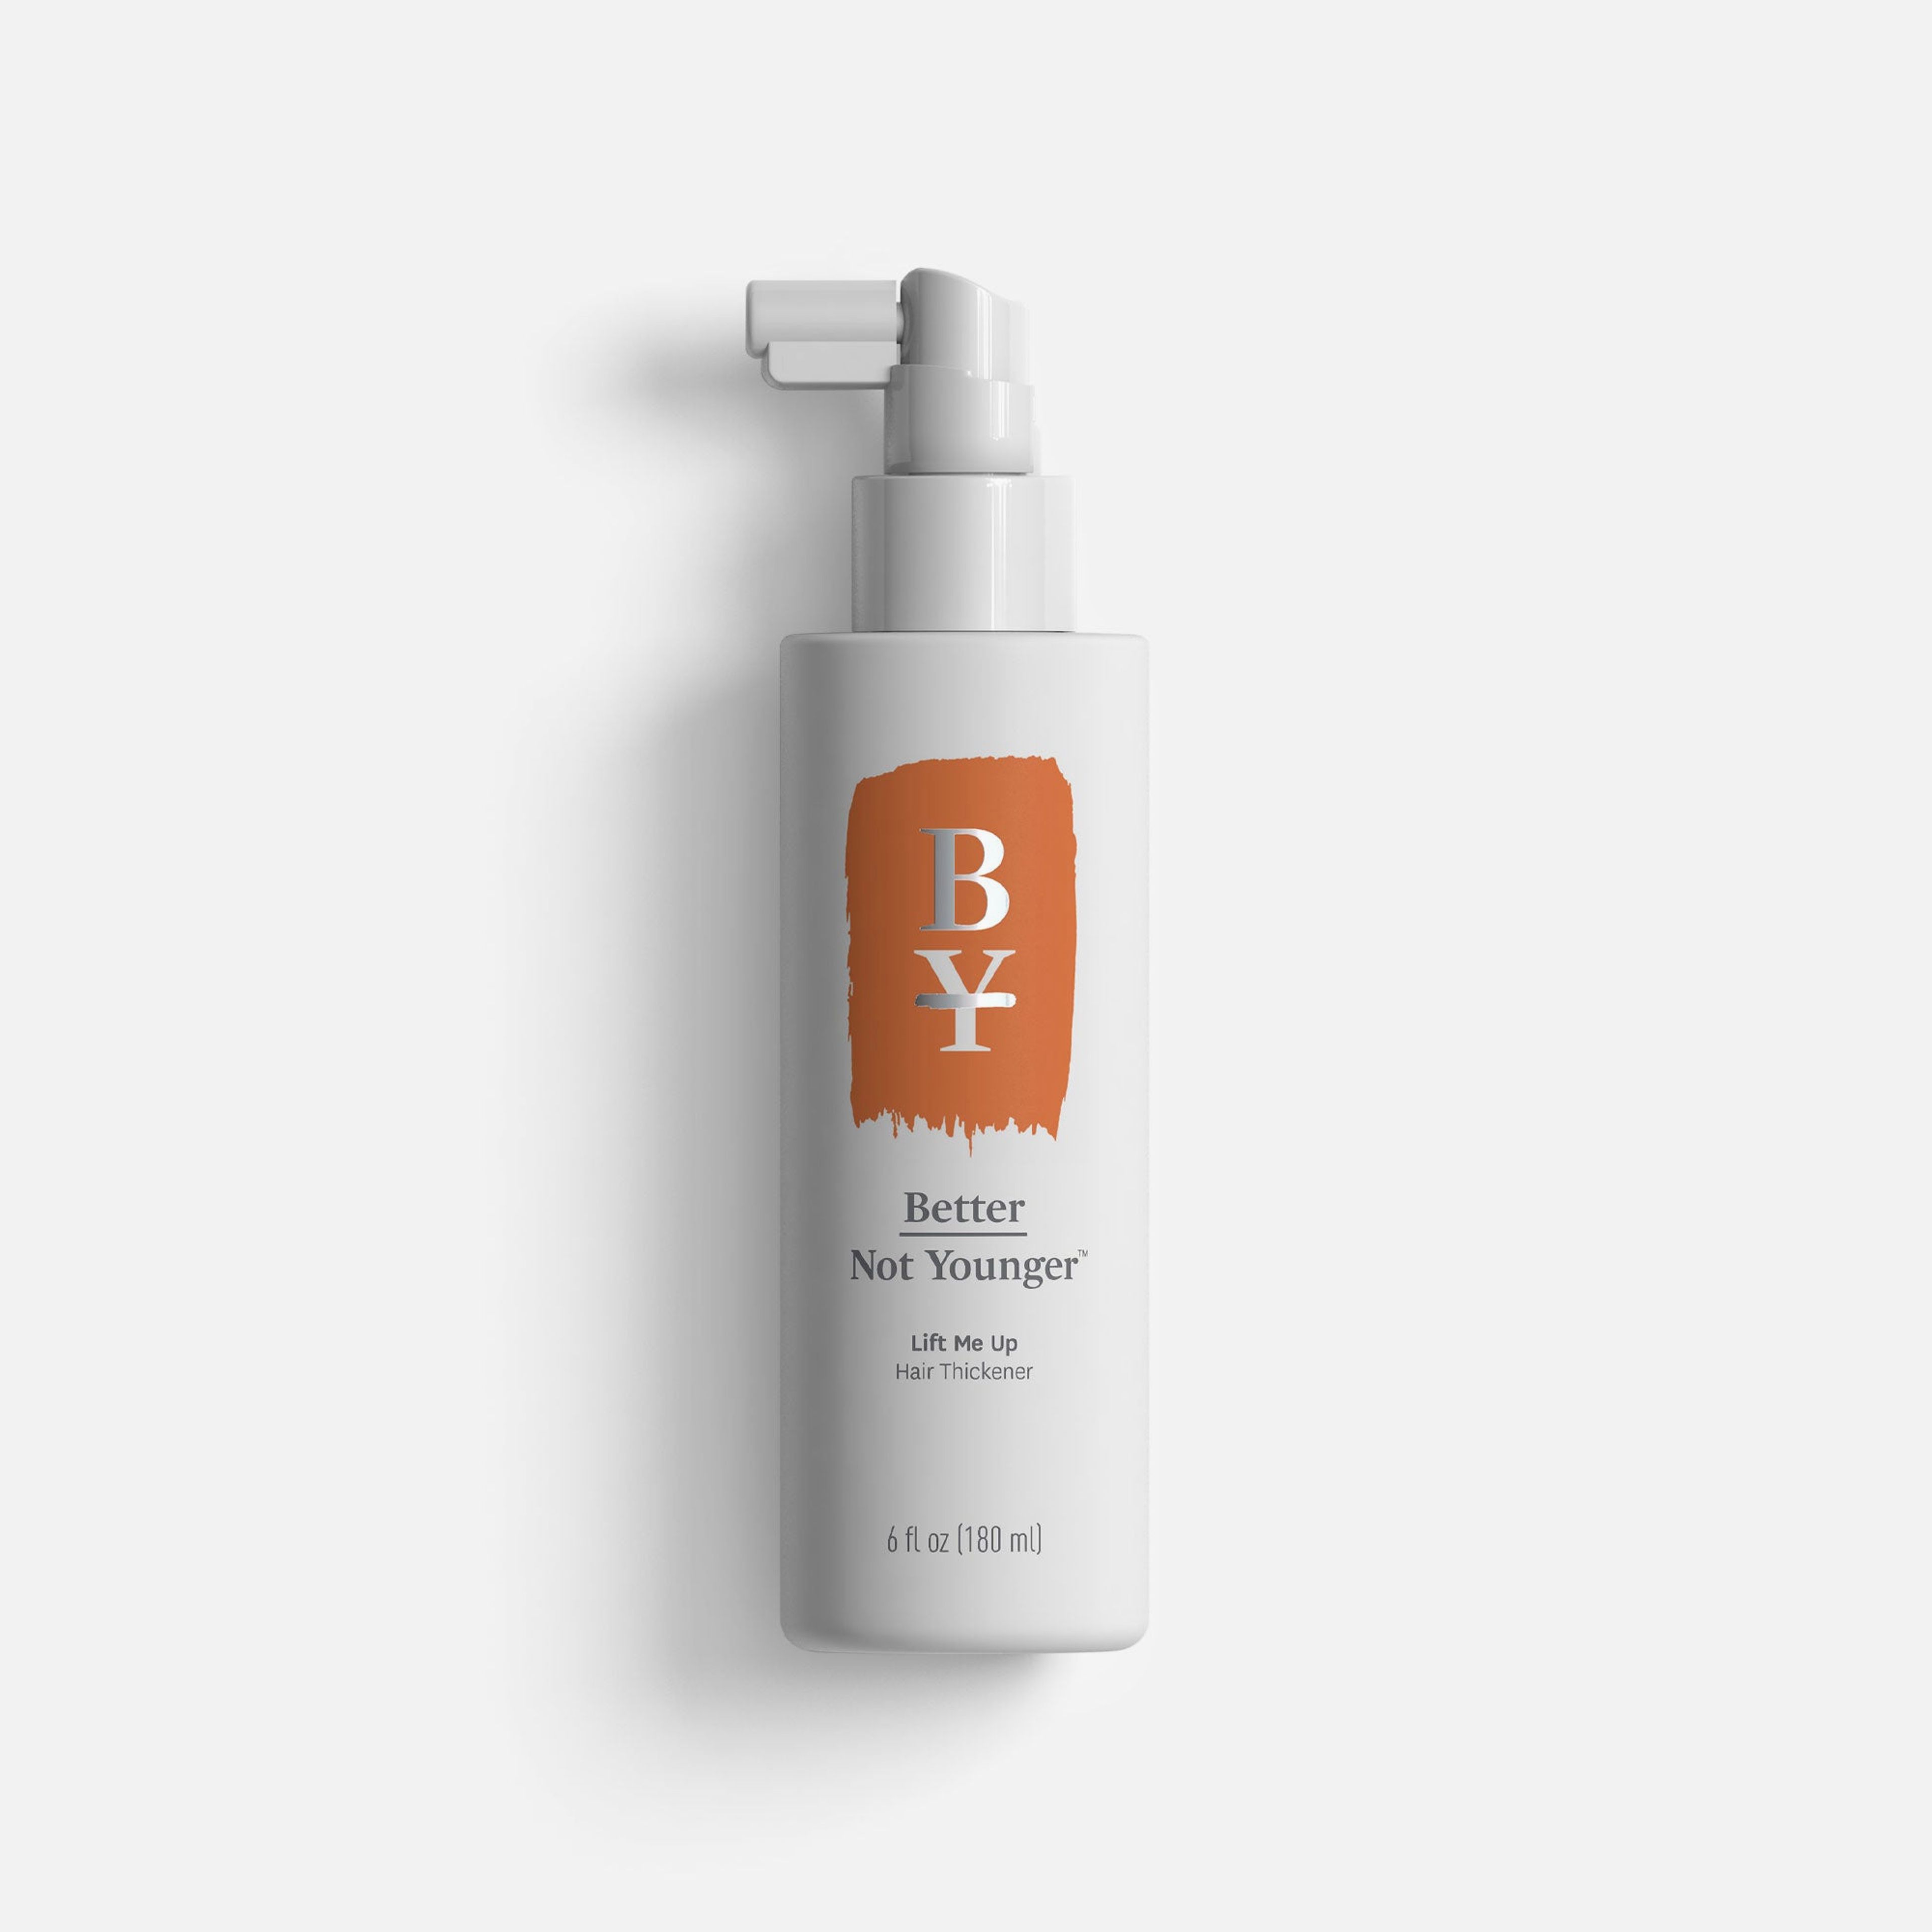 Lift Me Up Hair Thickener